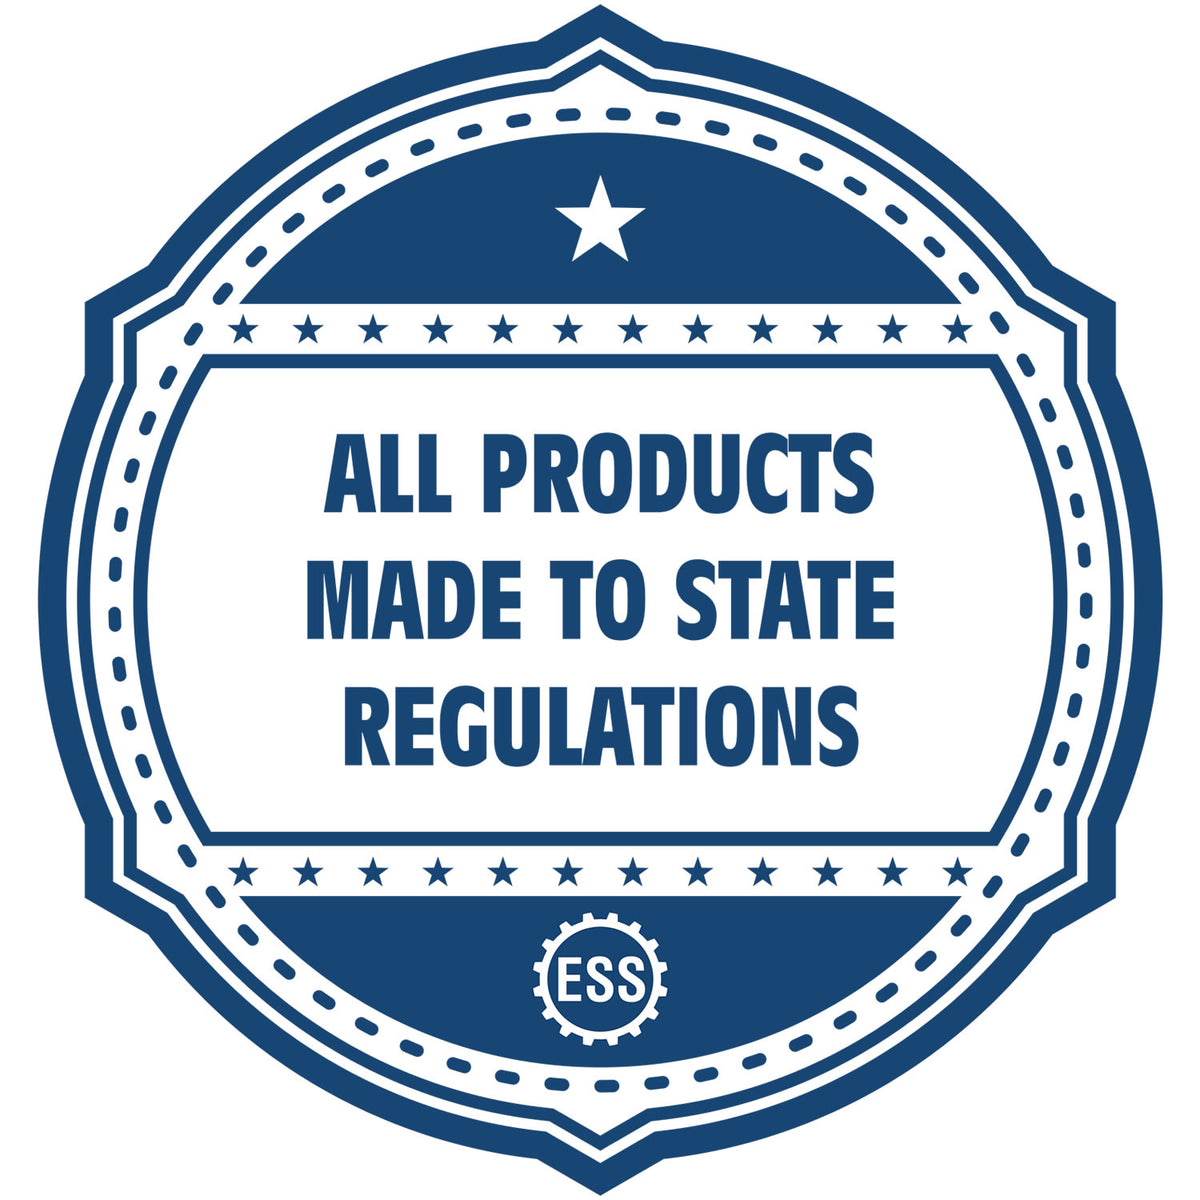 An icon or badge element for the MaxLight Premium Pre-Inked North Dakota Rectangular Notarial Stamp showing that this product is made in compliance with state regulations.